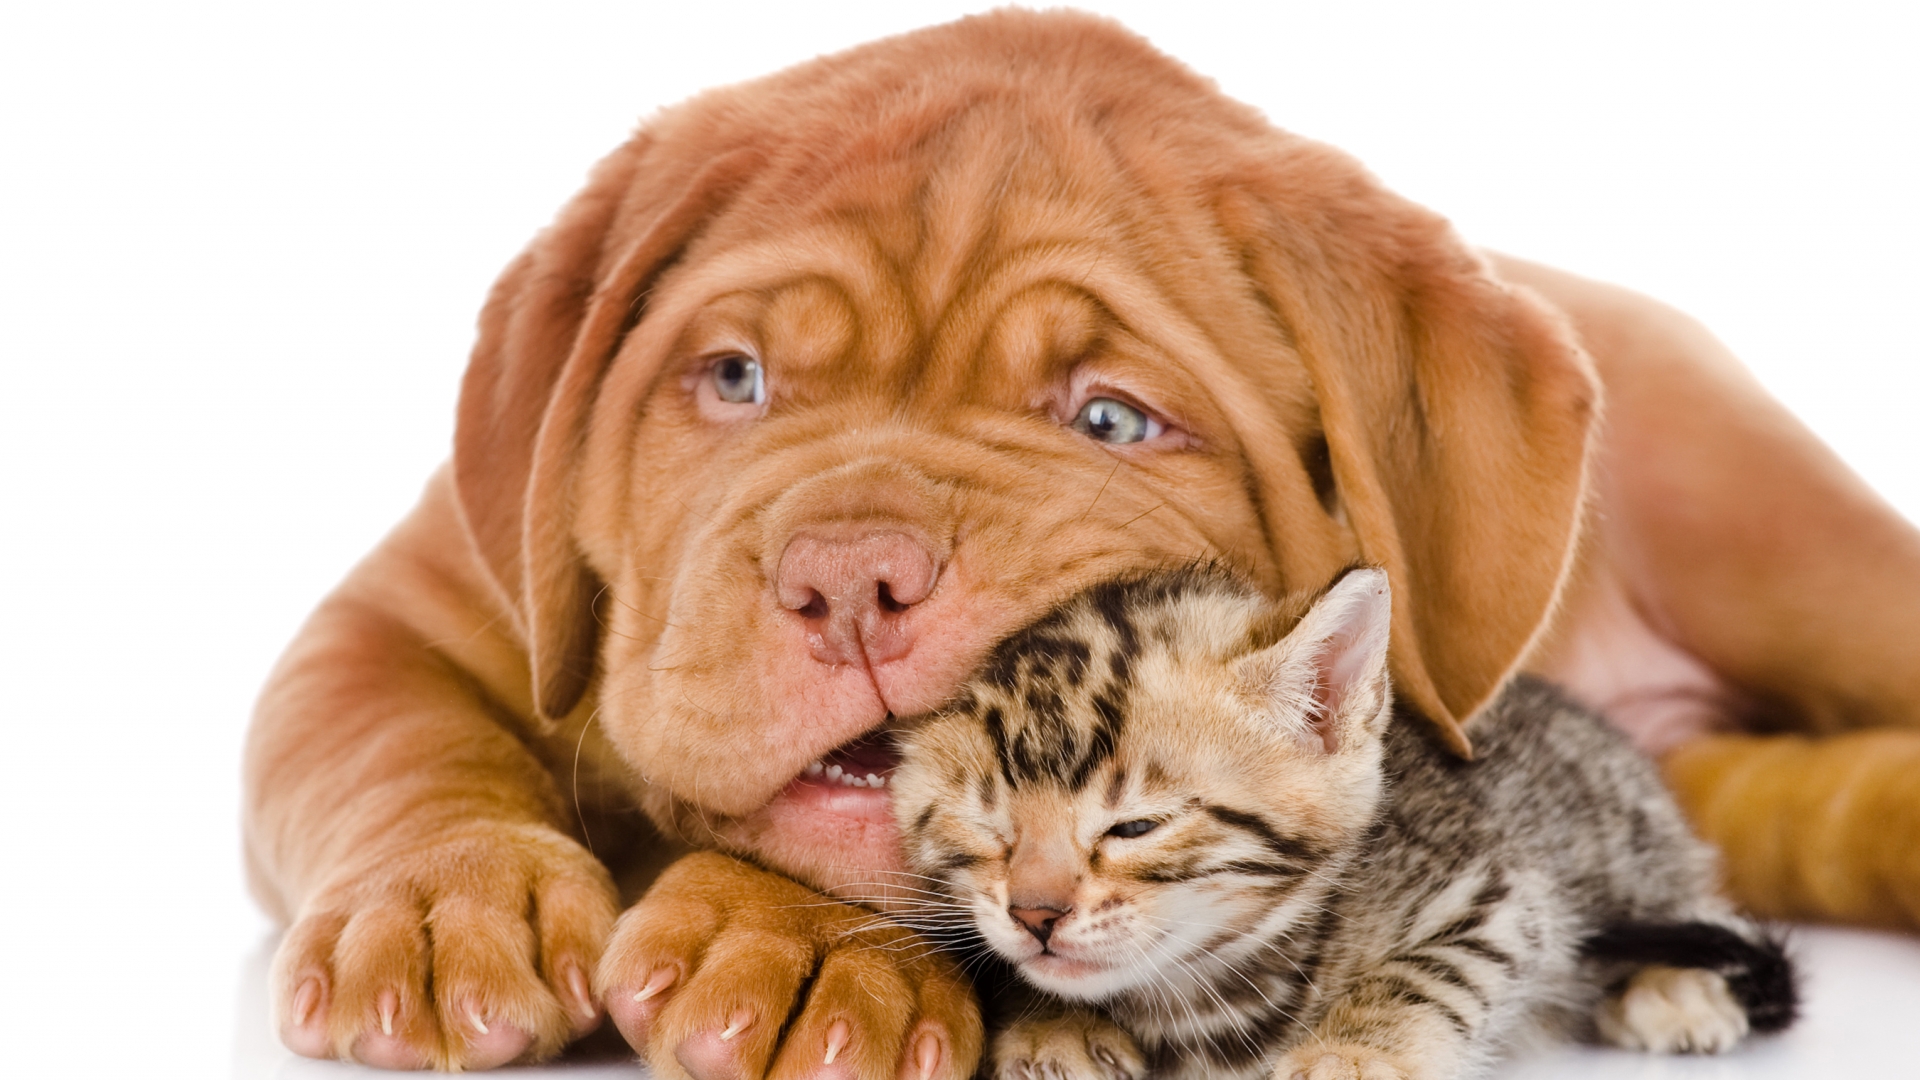 Cat & Dog Wallpapers, Pictures, Images